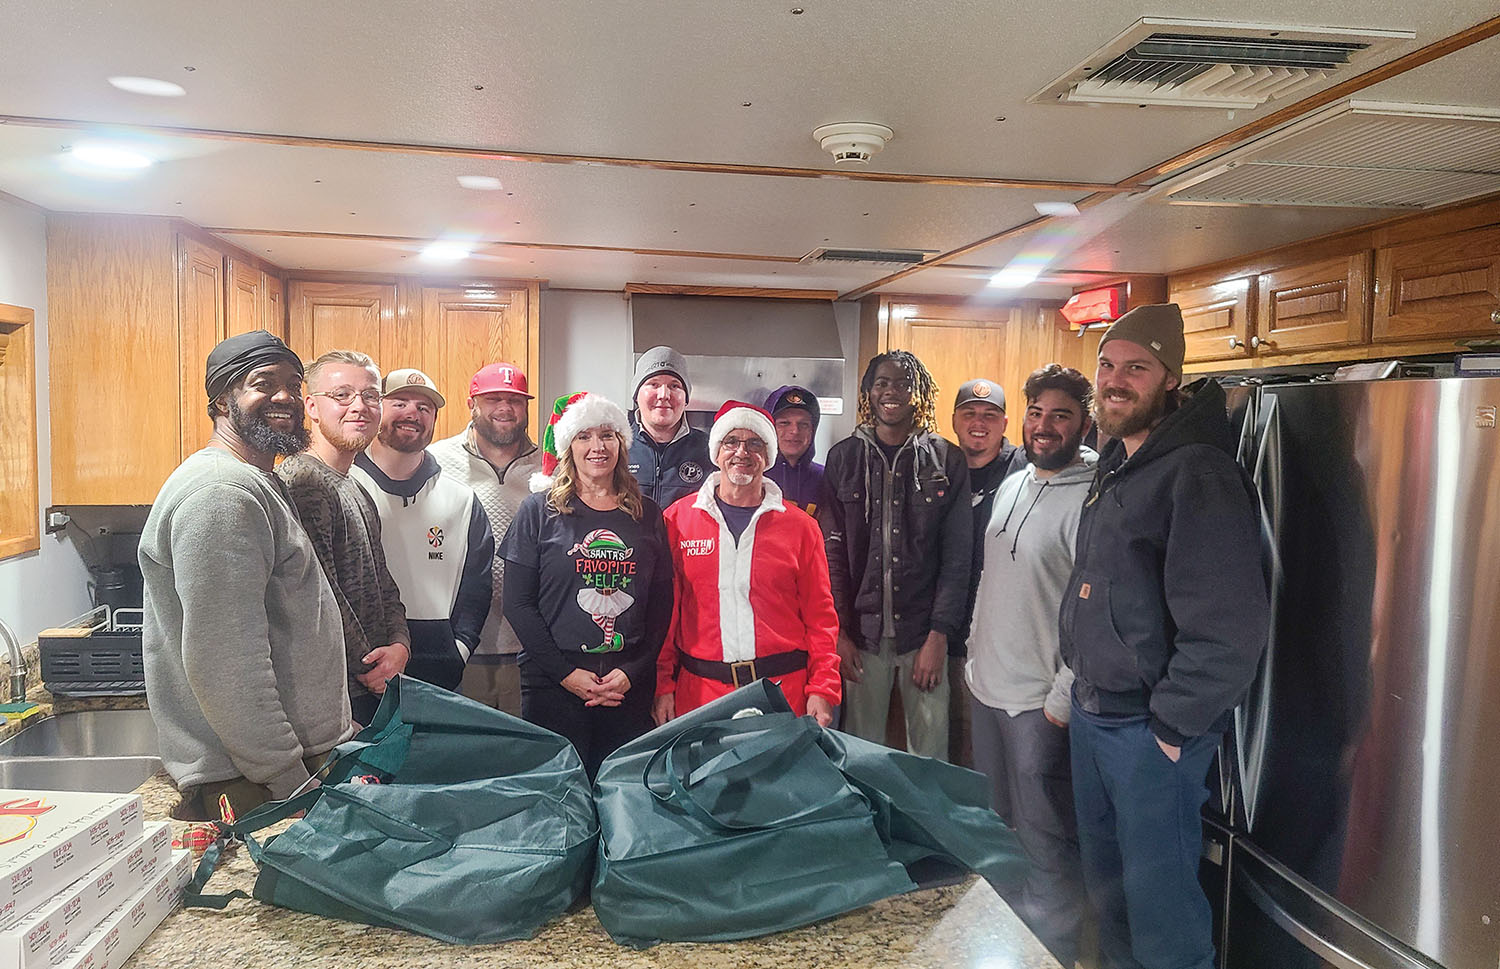 The crew of the mv. Shelby Gros—Capt. Jonathan Gilliland, pilot Taylor Martin and deckhands Dakota Corley, Logan Slade, Jacob Anclade and Gerardo Canales—gather with Platinum Marine’s Trey and Cheri Dufriend on the boat just before Christmas. The crew responded to a radio distress call of an incapacitated wheelman on a fleet boat January 15 at a grain elevator in Reserve, La. (Photo courtesy of Platinum Marine)